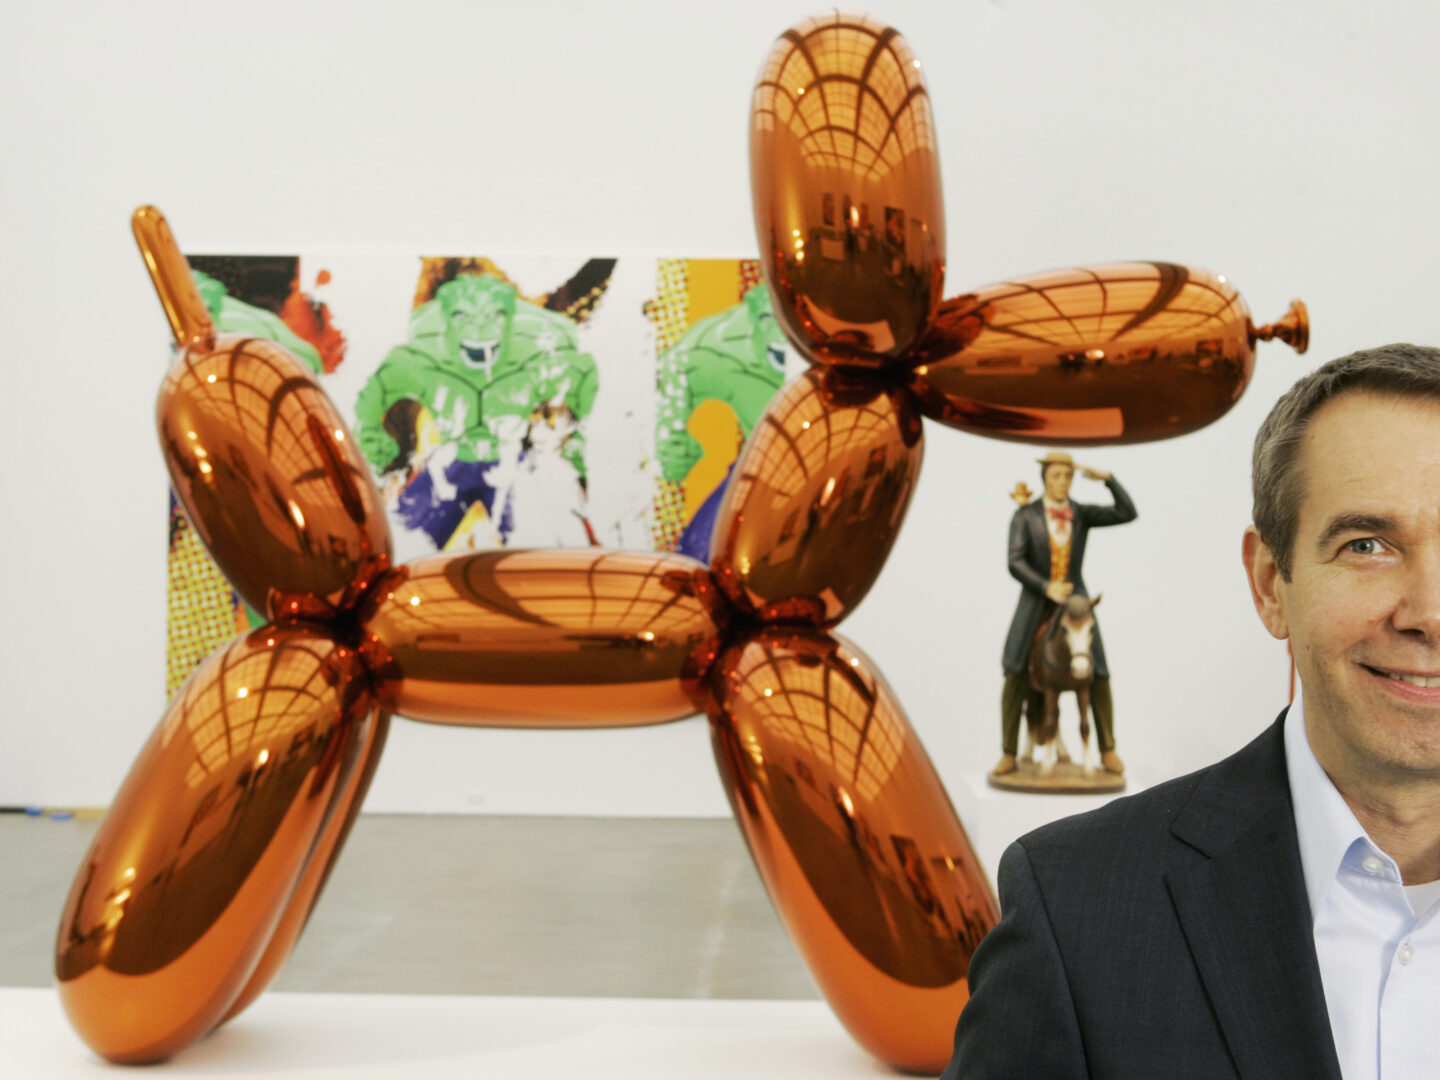 FILE - In this Thursday, May 29, 2008 file photo, artist Jeff Koons poses beside one of his works, 